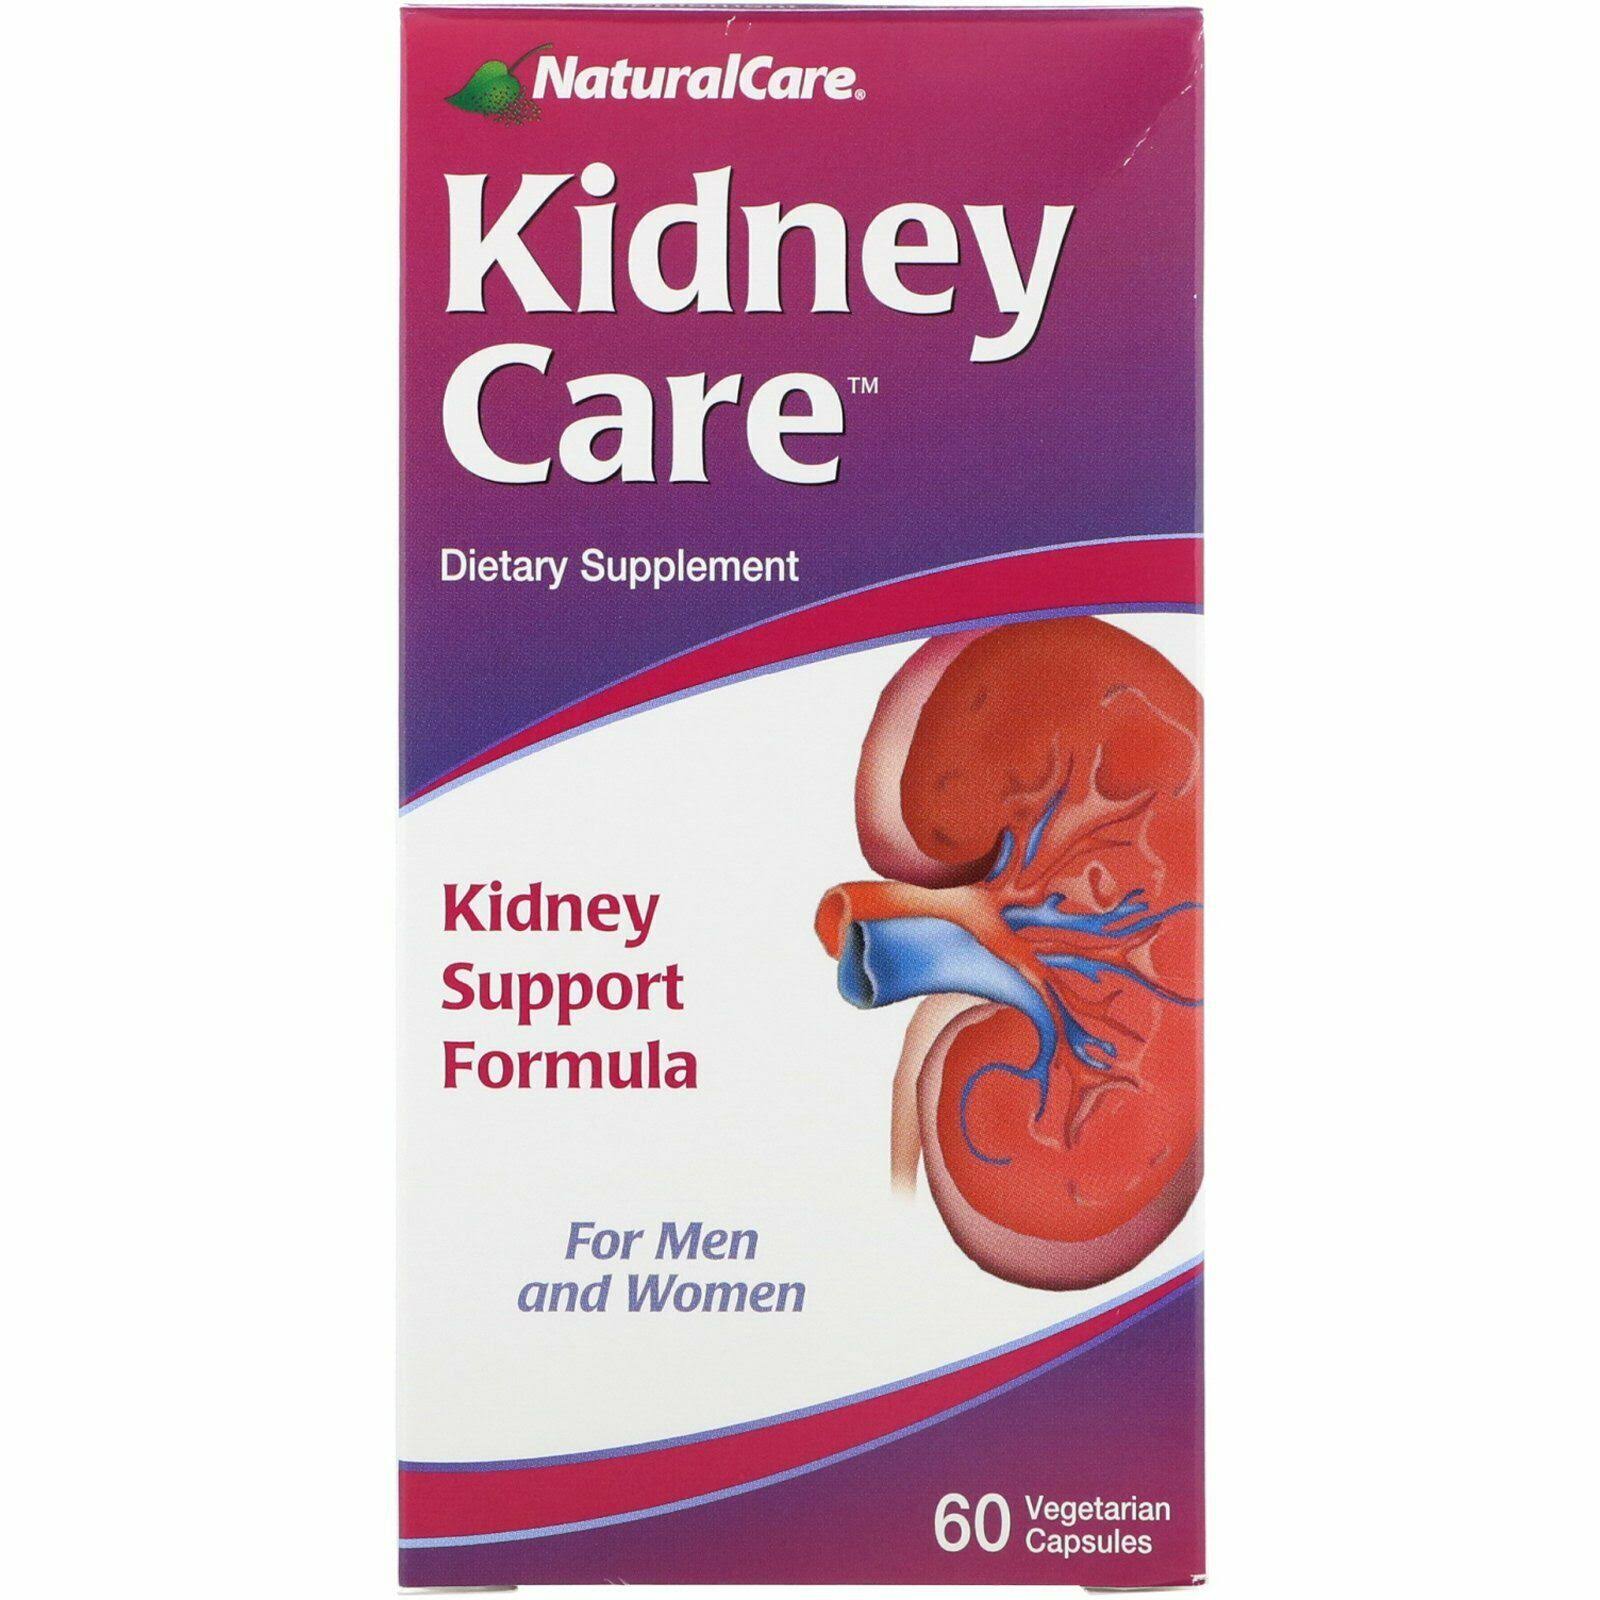 Natural Care Kidney Care Supplement - 60 Capsules